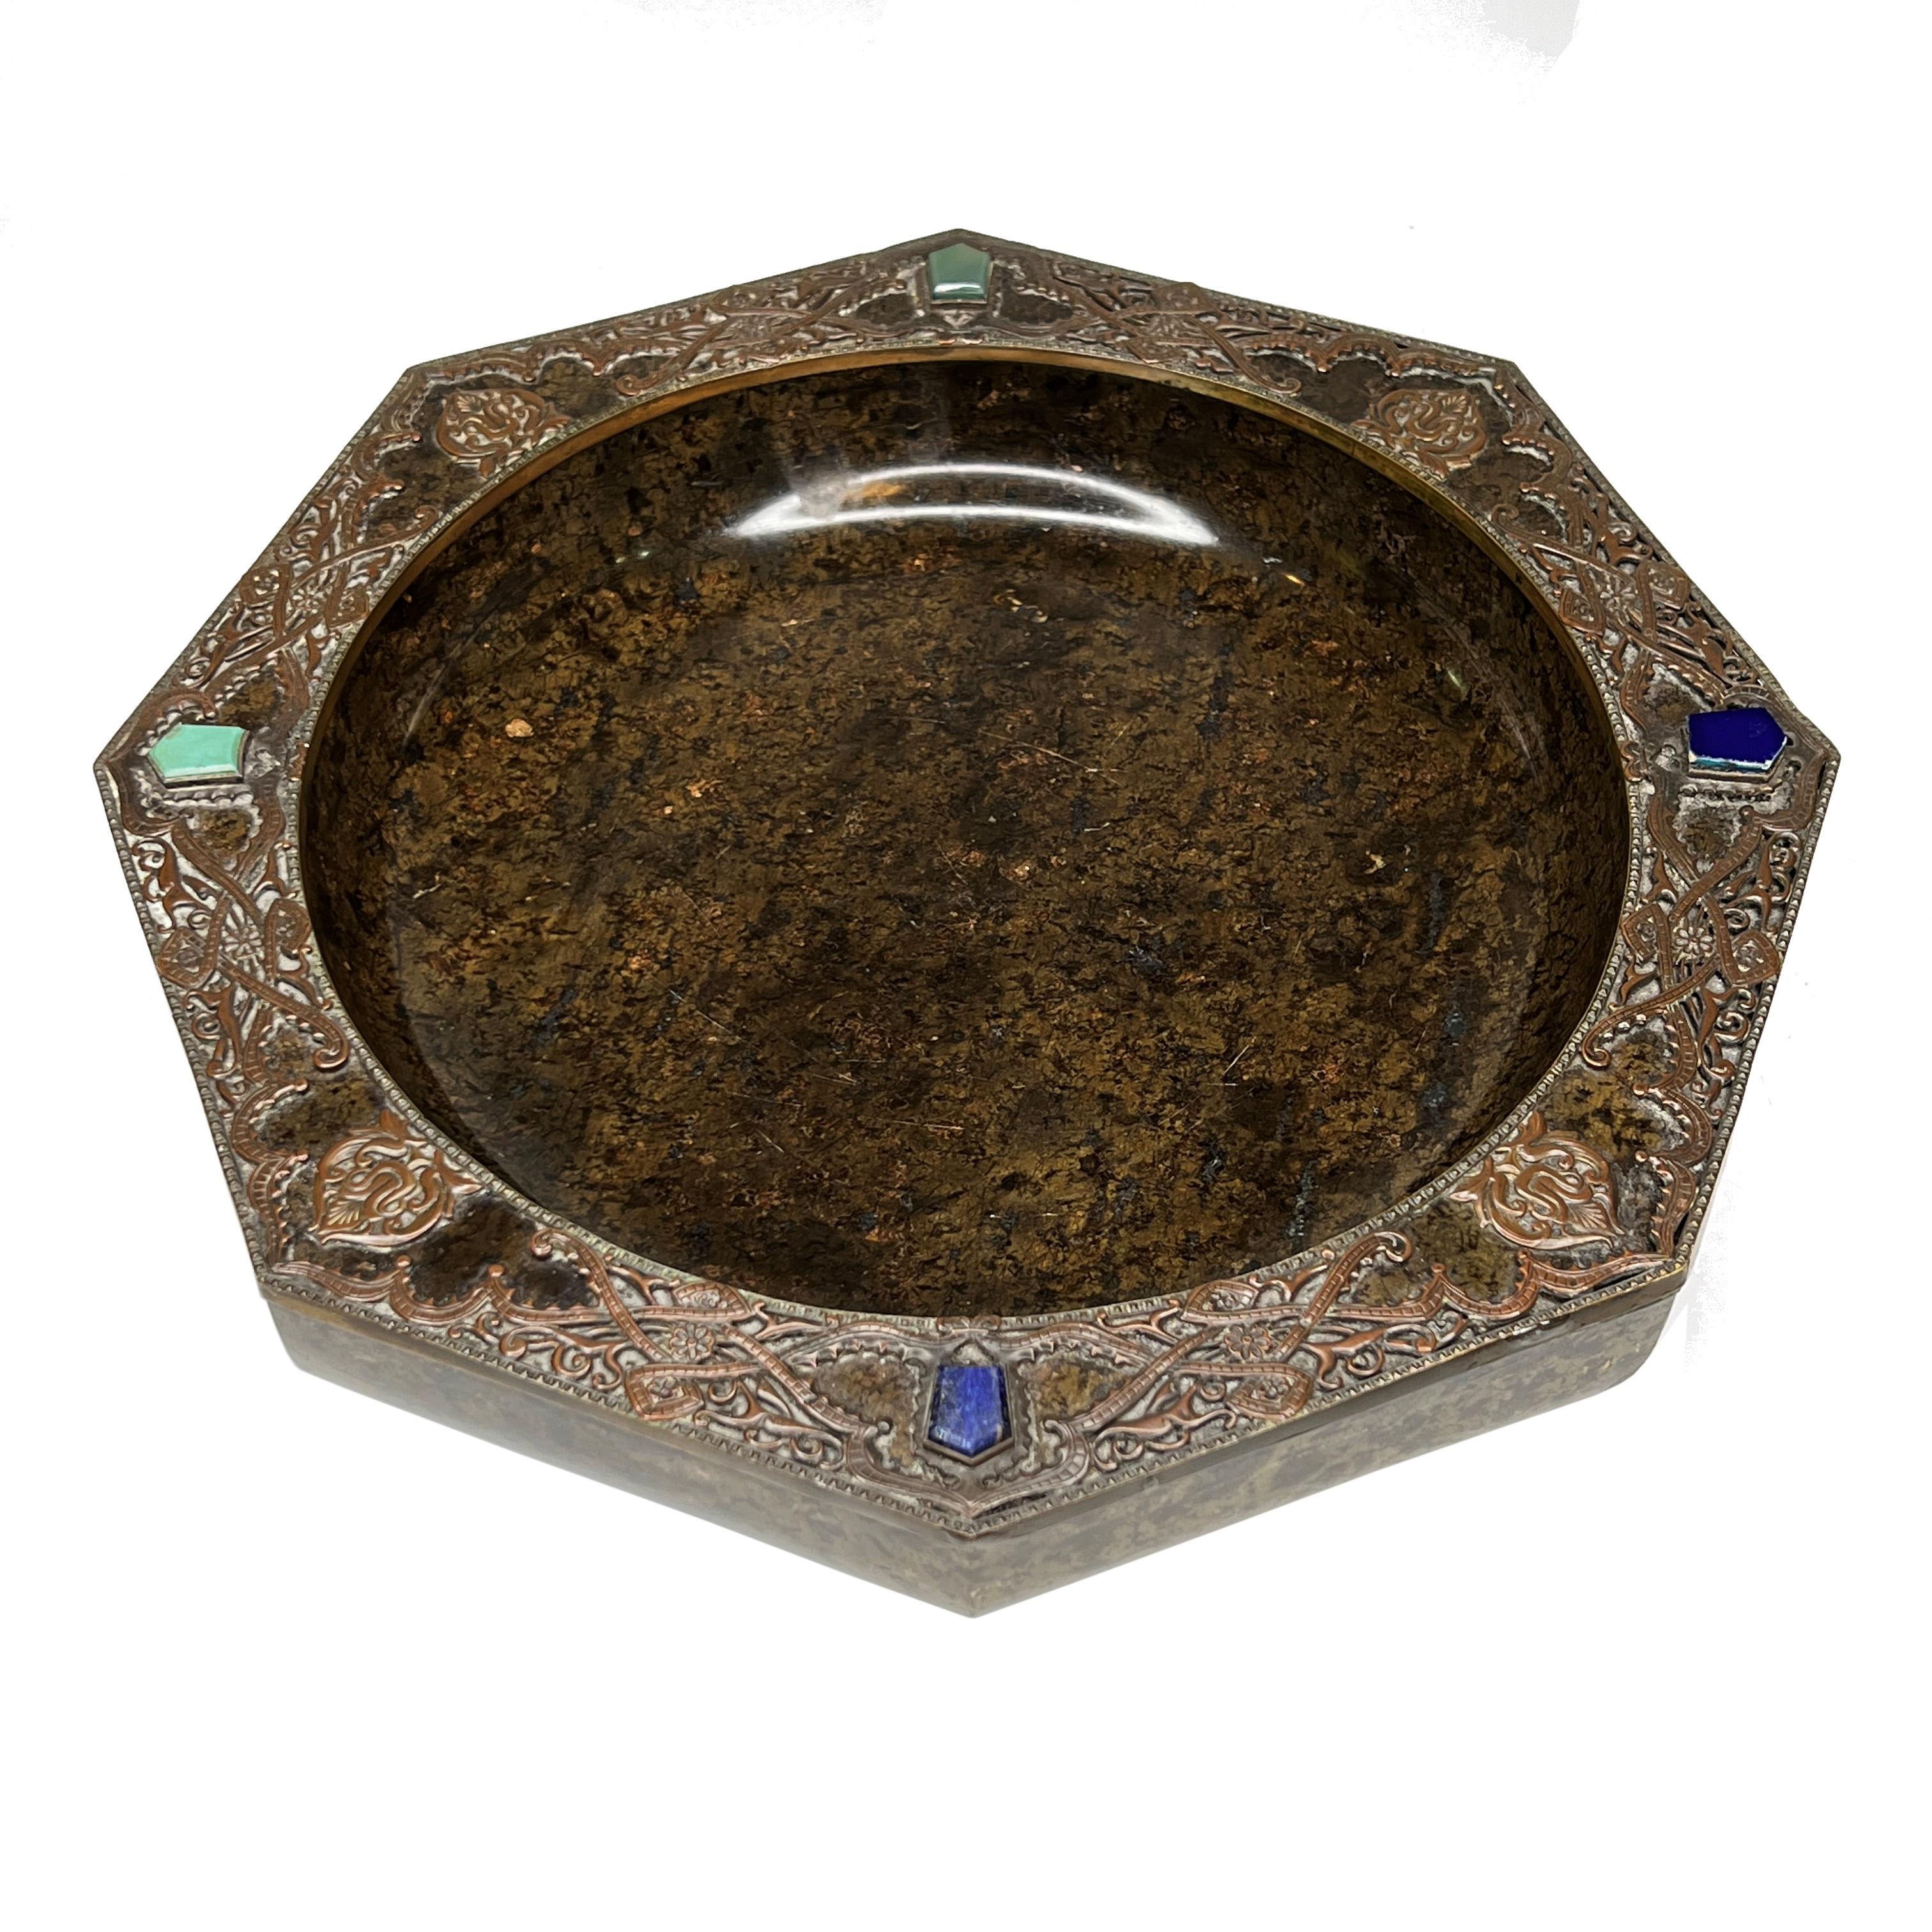 Our massive octagonal-shaped brown marble cigar tray in the Renaissance style is attributed to E.F. Caldwell, and features applied Arabesque copper designs around the rim, plus turquoise and lapis lazuli colored stones.